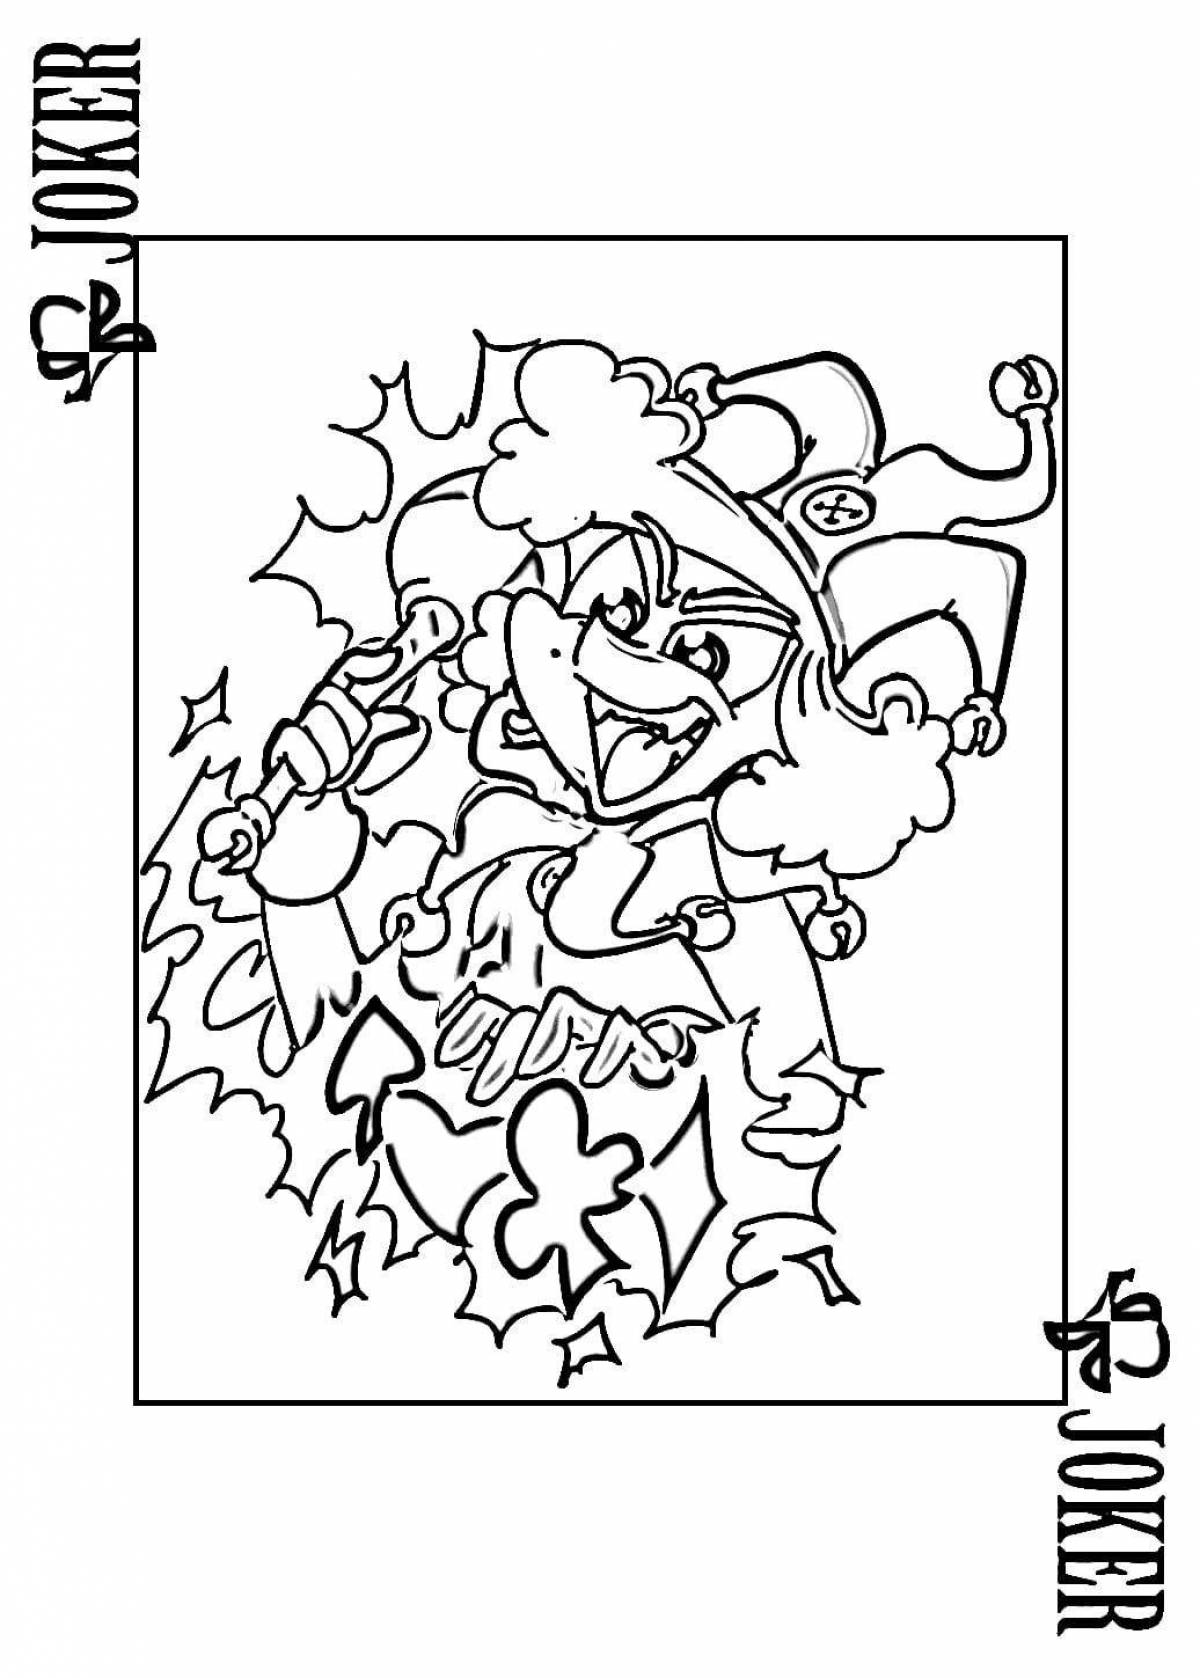 Charming felix 13 coloring cards